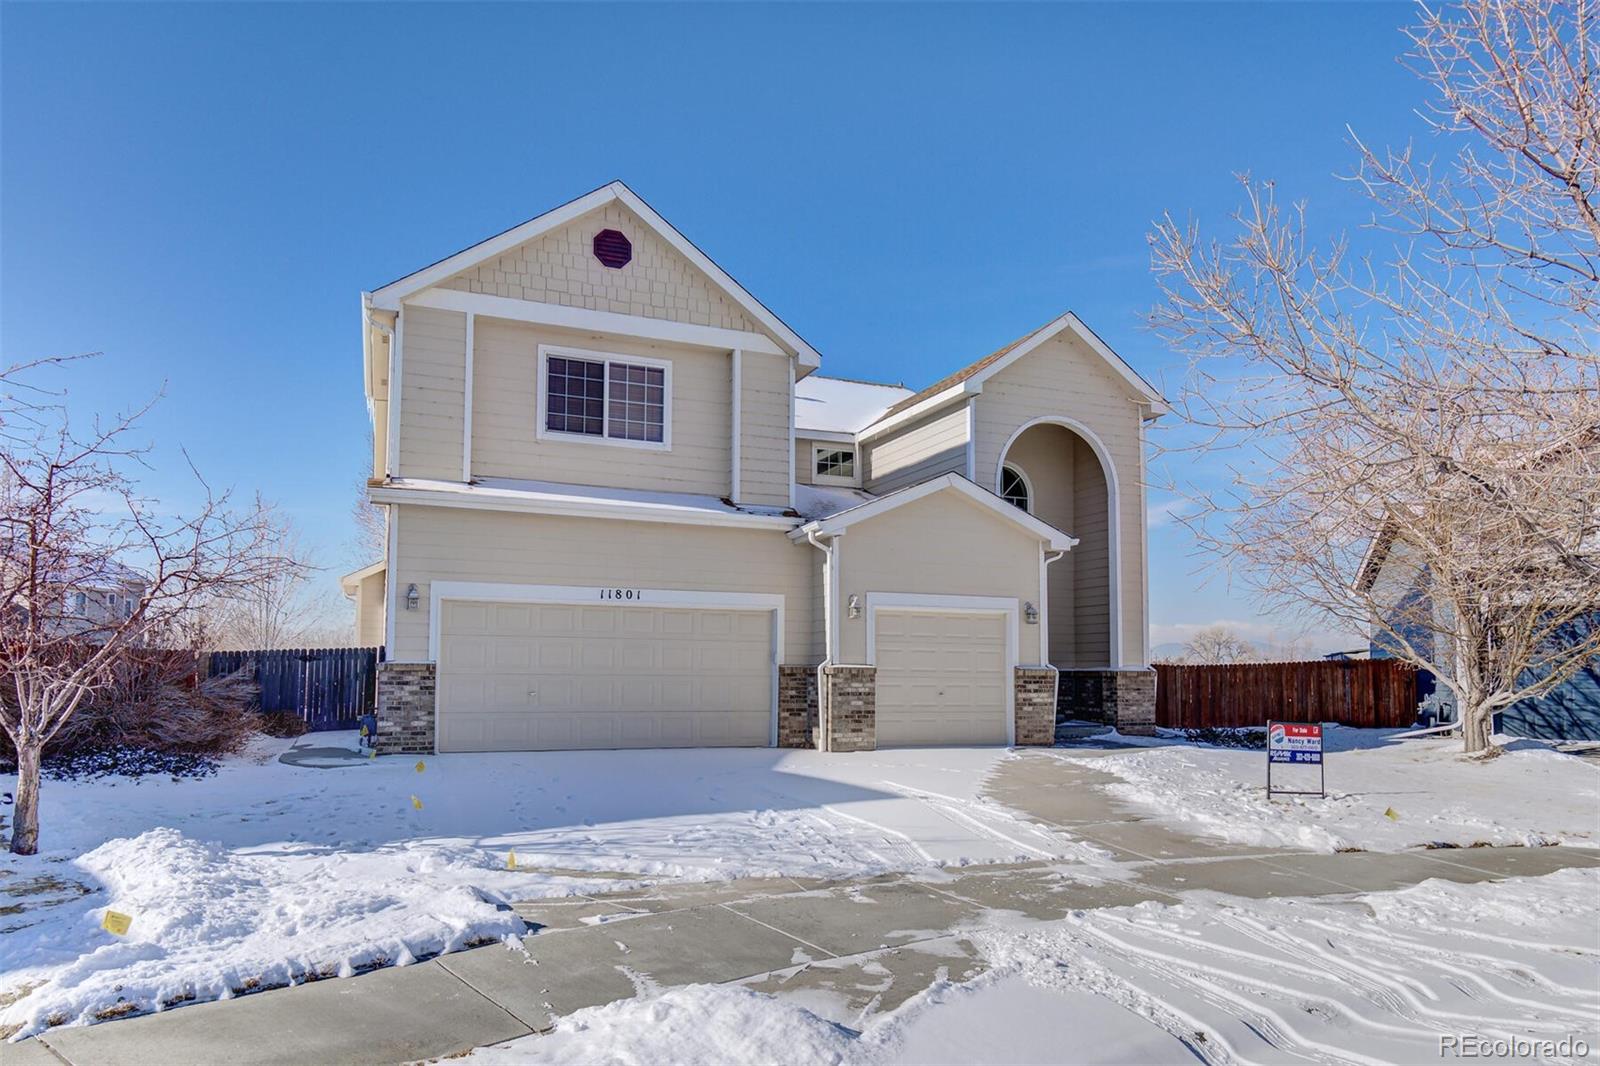 Report Image for 11801  Macon Street,Commerce City, Colorado